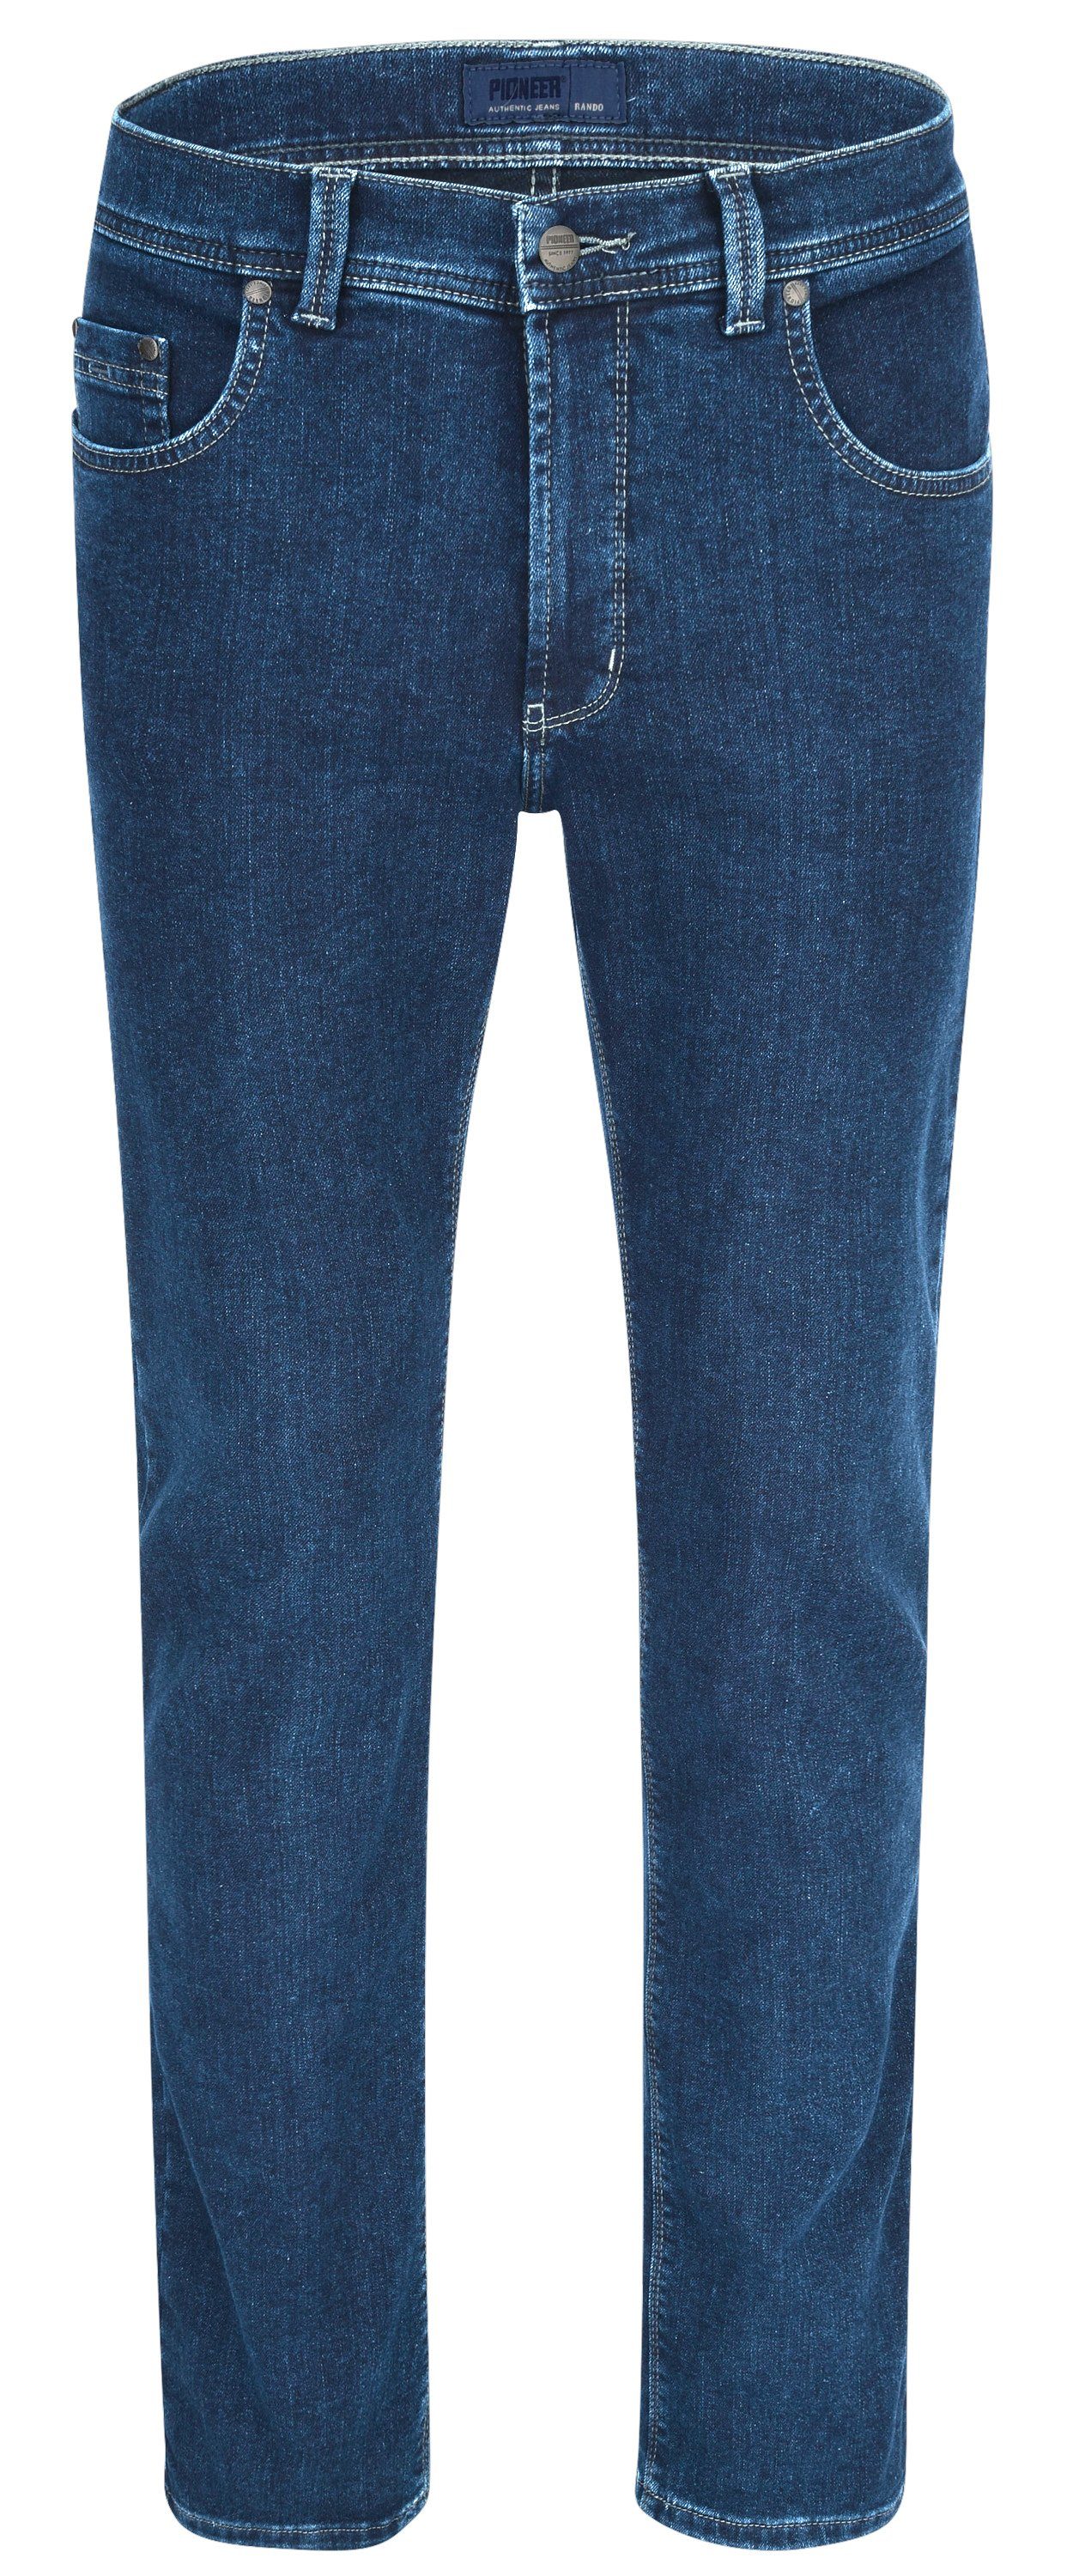 Pioneer Authentic Jeans 5-Pocket-Jeans PIONEER RANDO blue denim 1680 9504.05 - THERMO